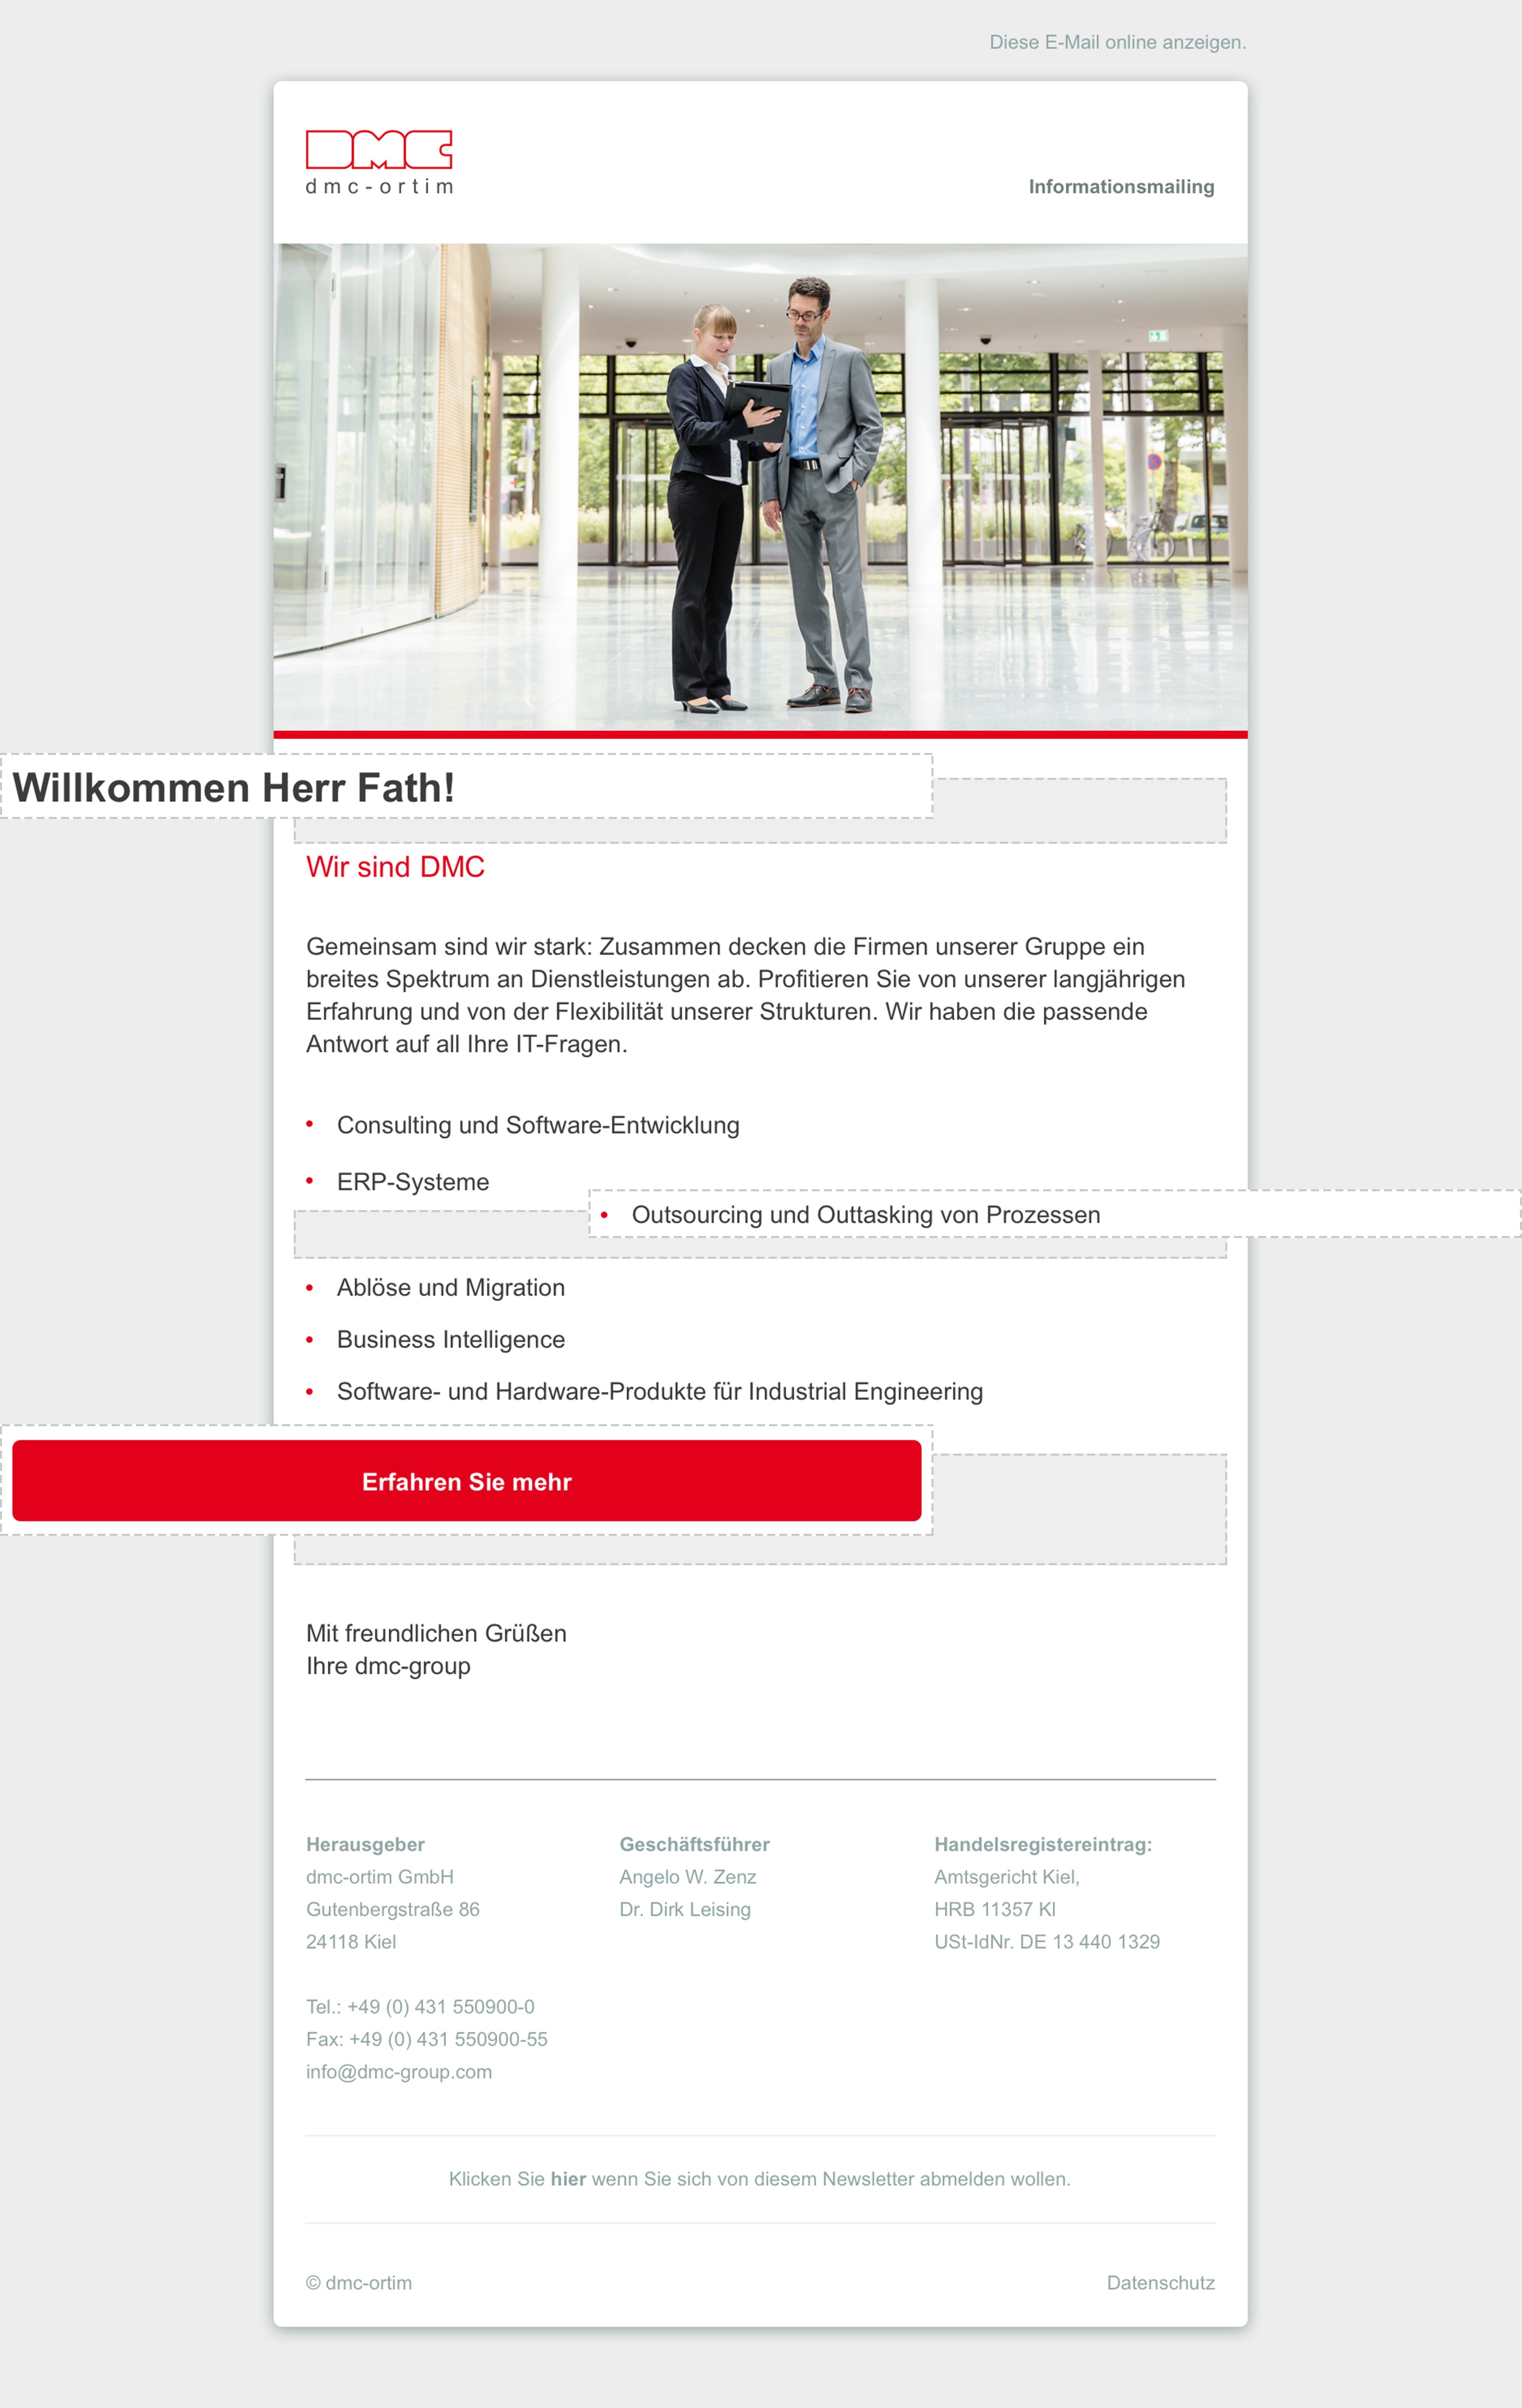 maxfath-dmc-group-muenchen-redesign-newsletter-mailing-system